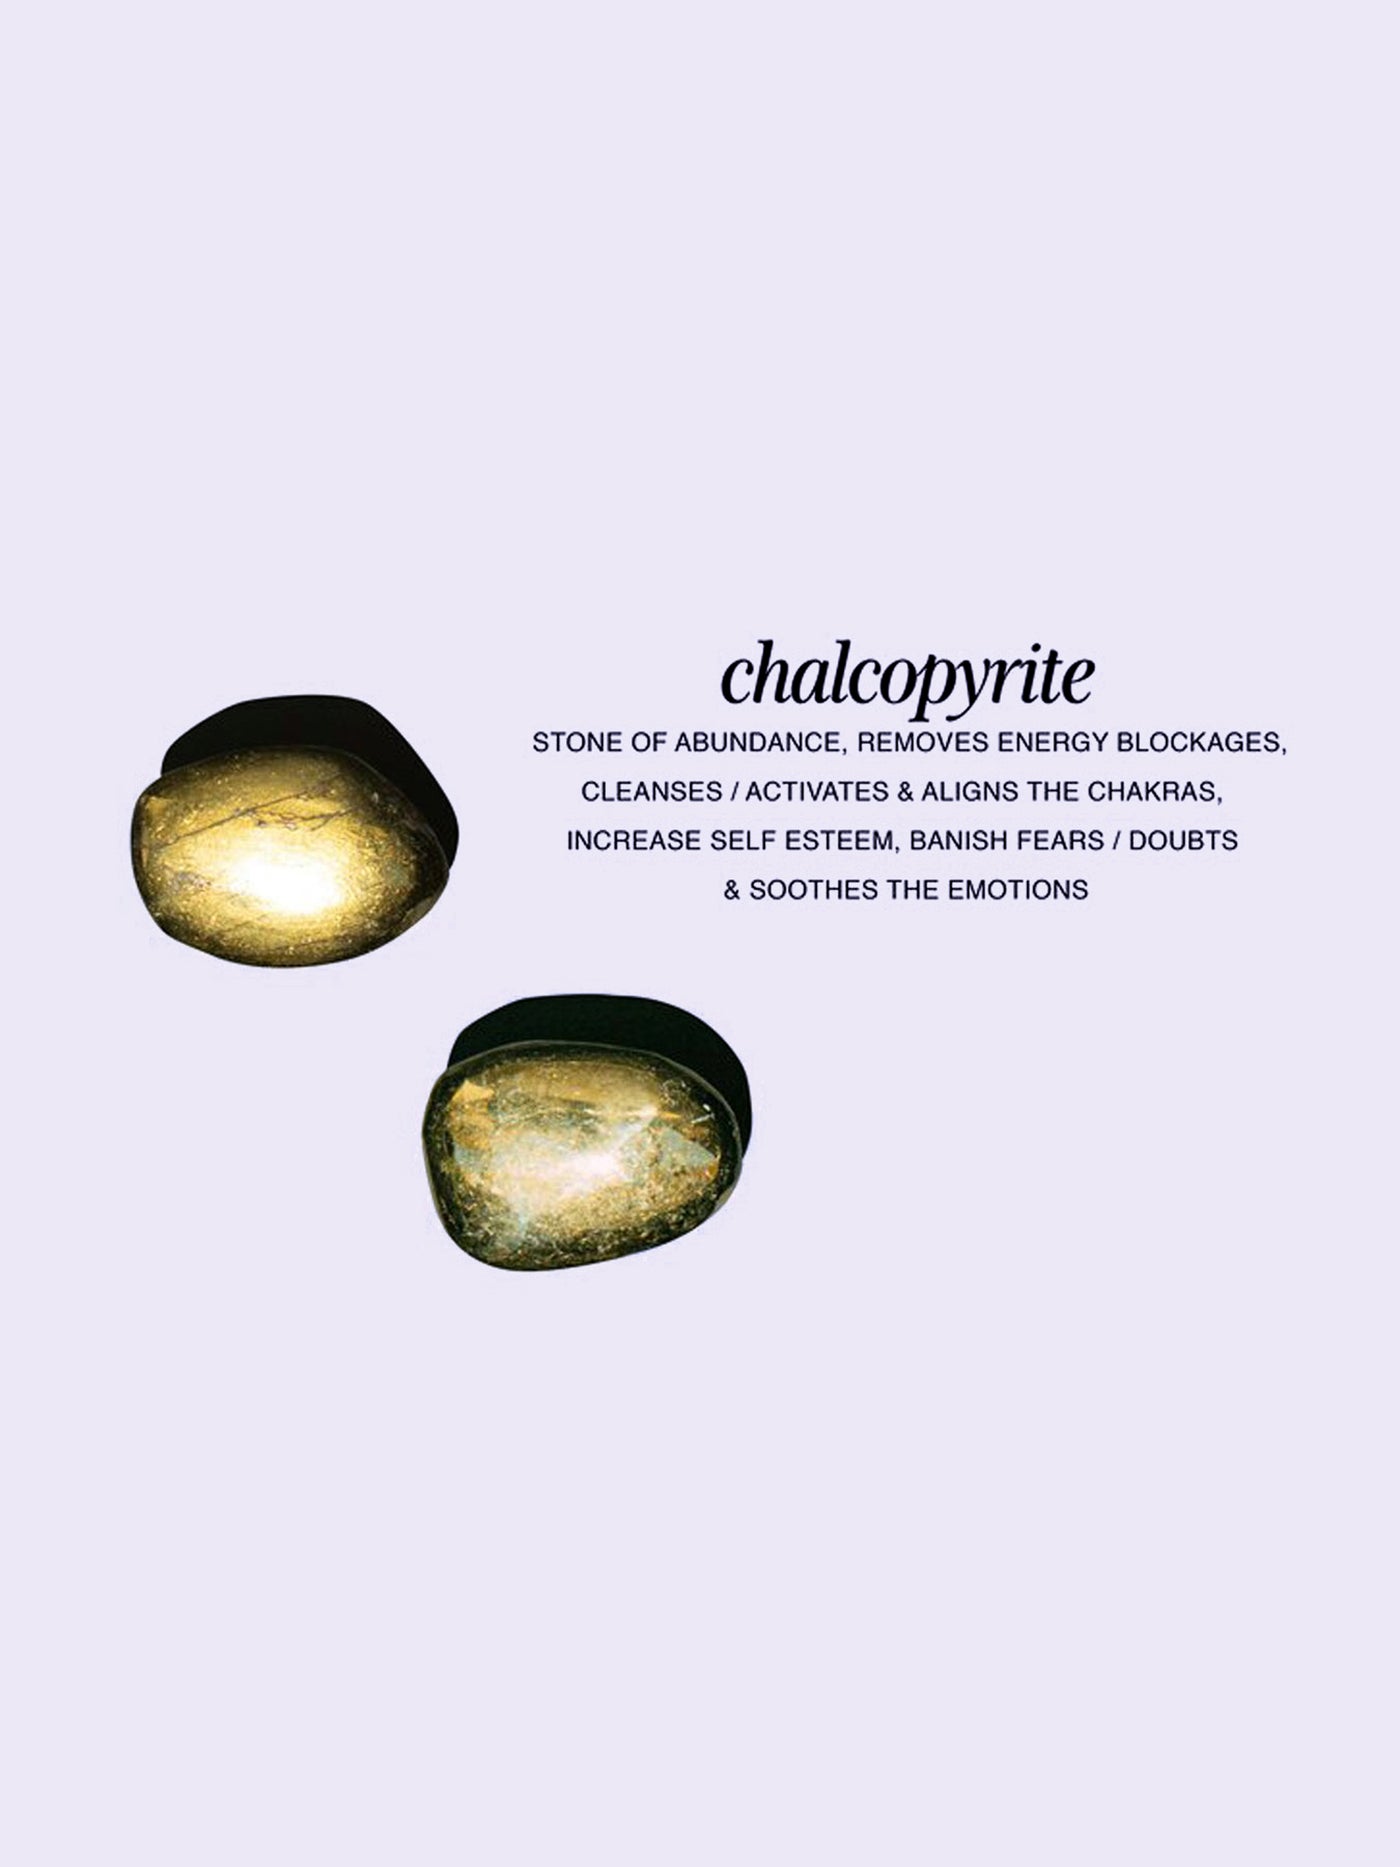 Chalcopyrite is a stone of abundance. It removes energy blockages, cleanses/activates and aligns the chakras, increases self esteem, banishes fears/doubts, and soothes the emotions.